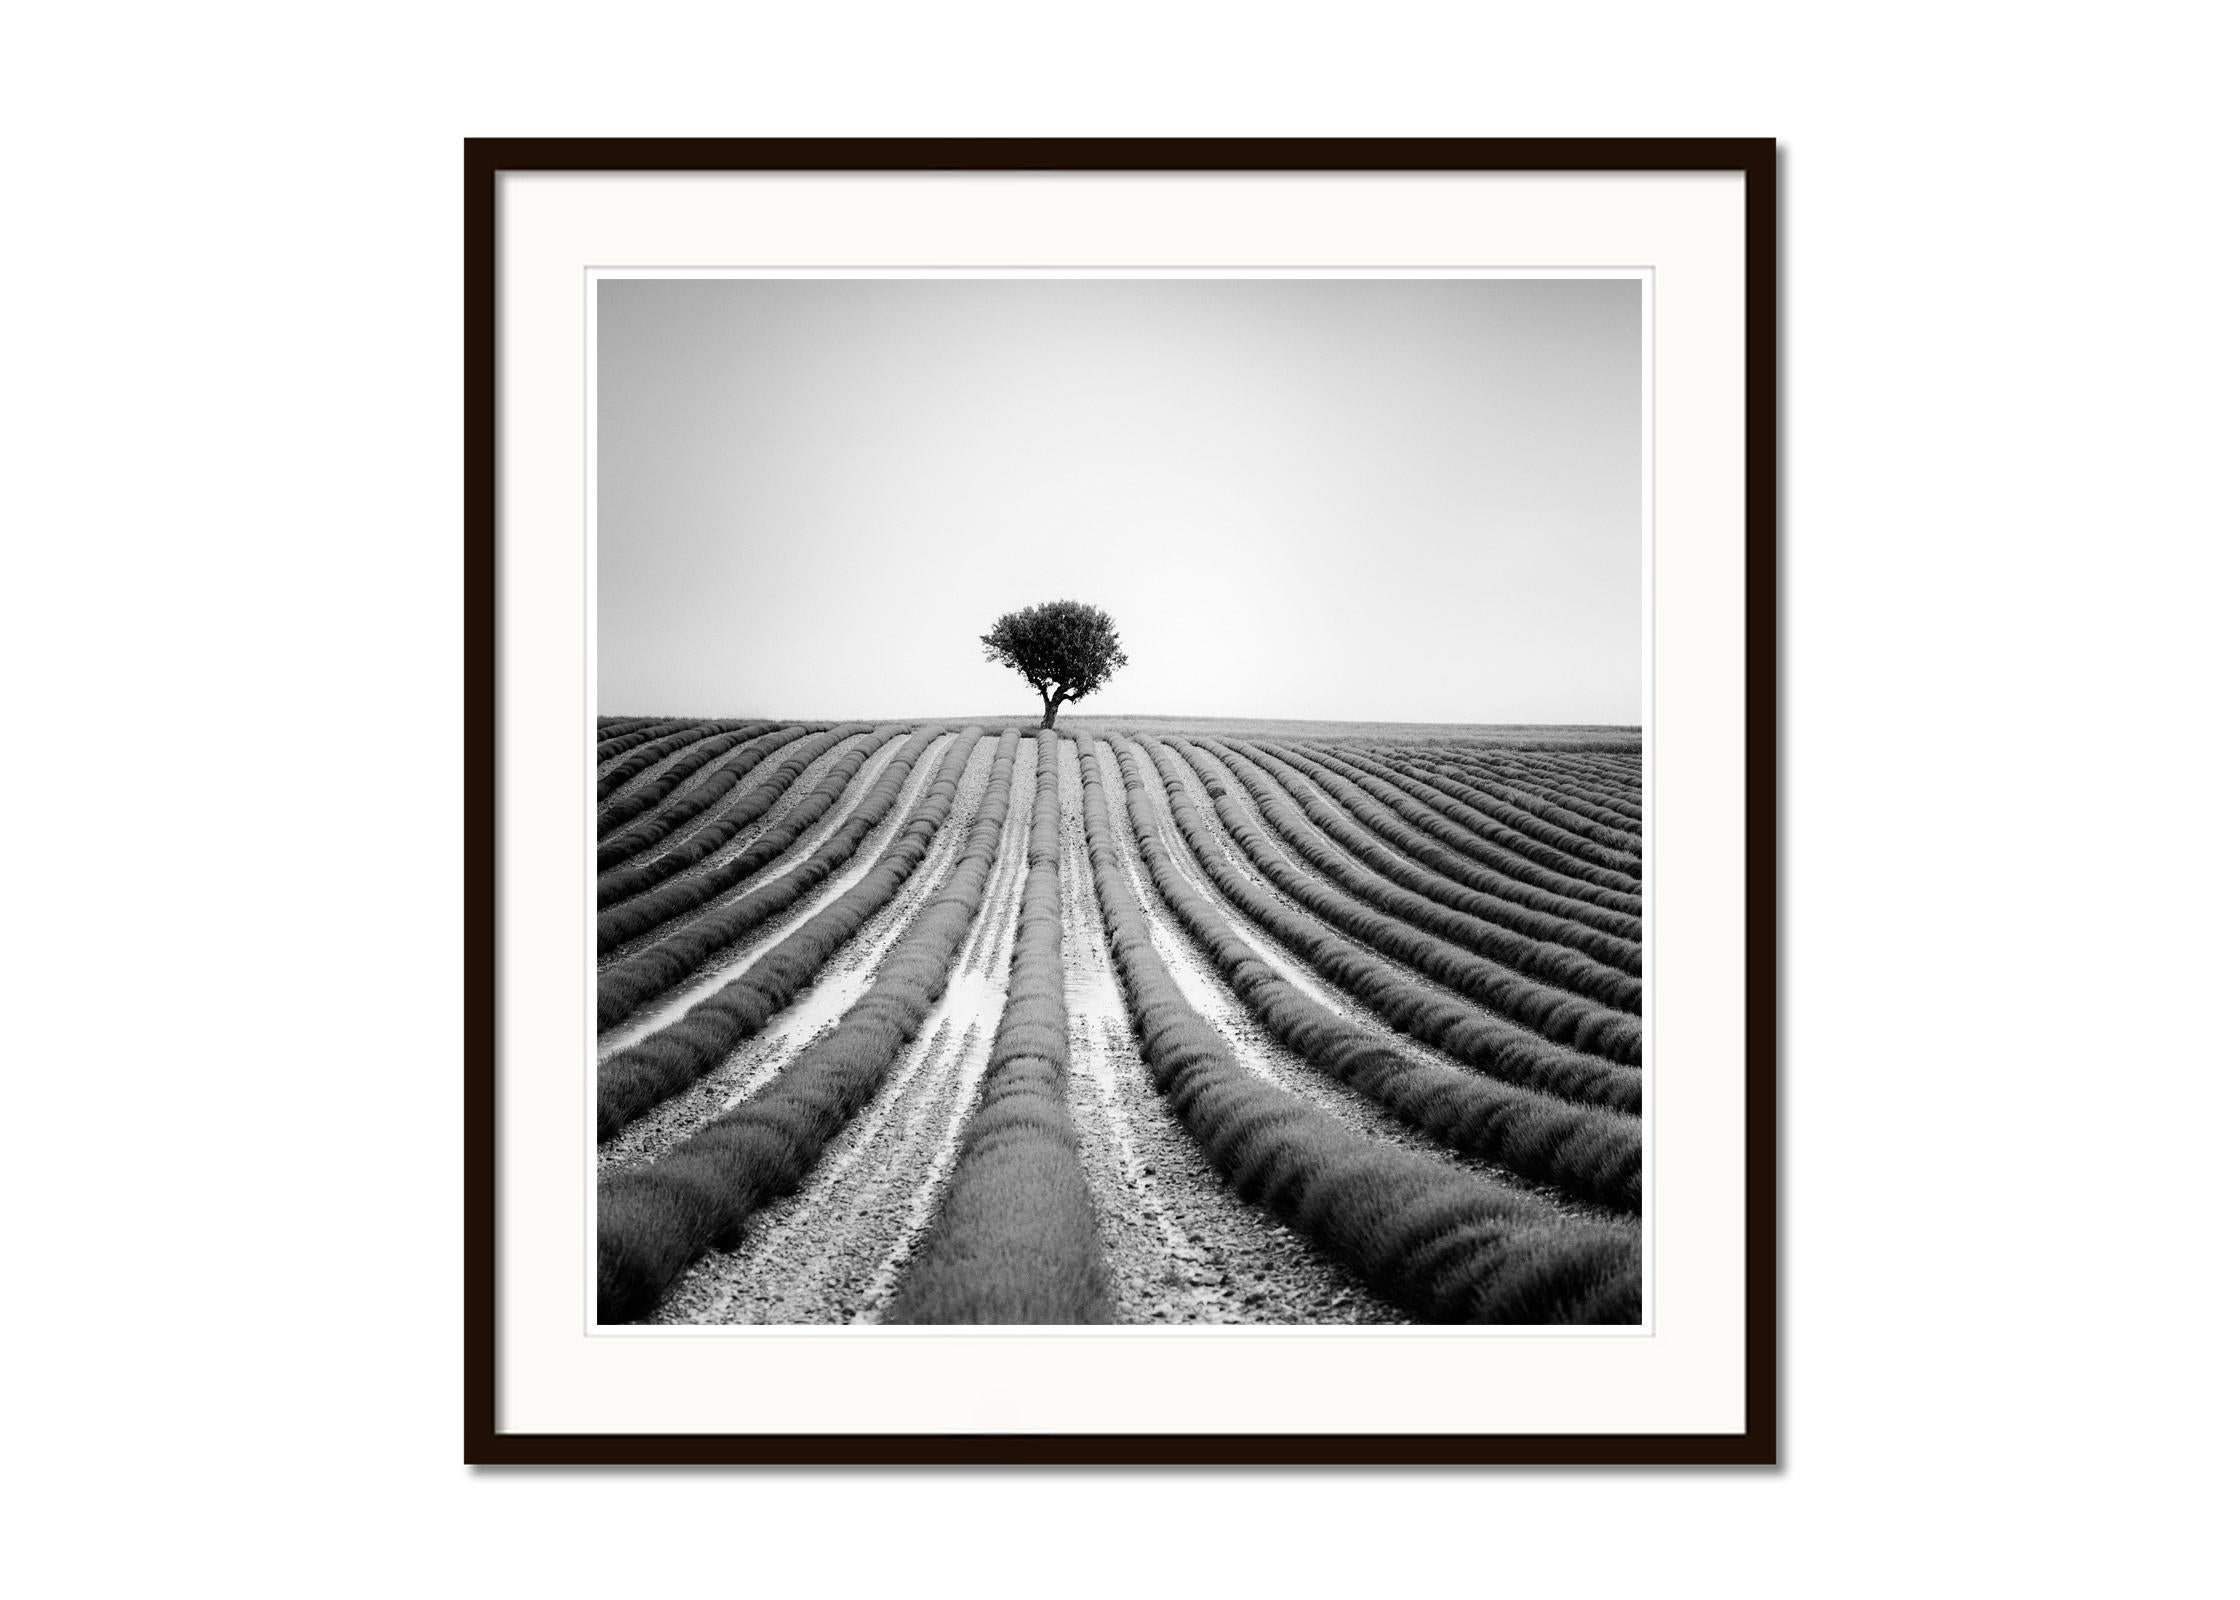 Lonely Tree in Lavender, Provence, France, black and white landscape photography - Gray Landscape Photograph by Gerald Berghammer